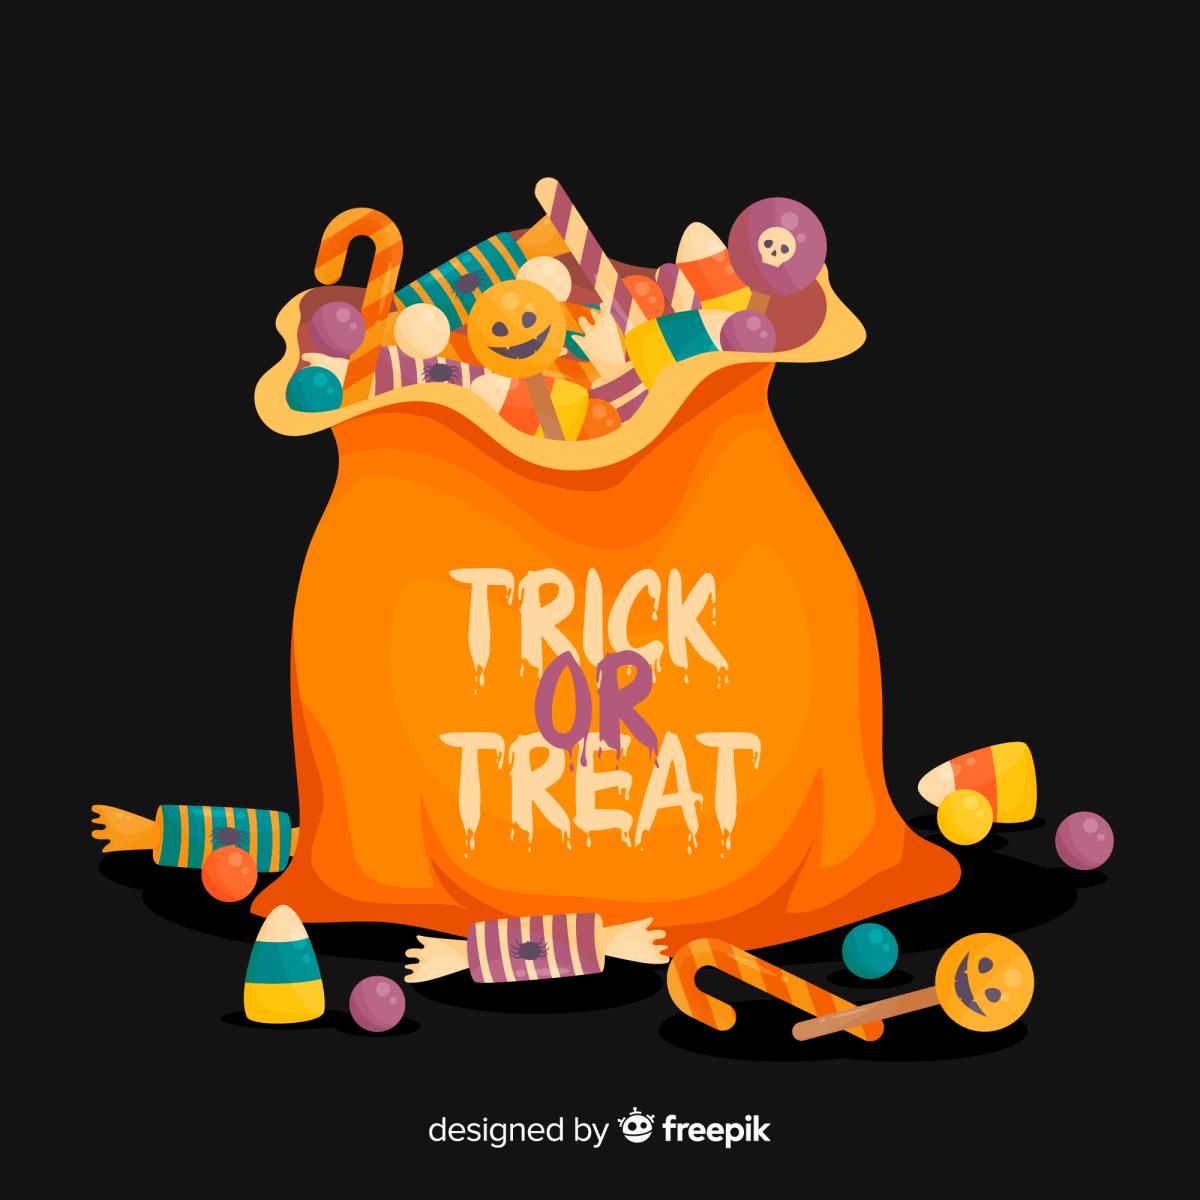 An orange cartoon bag that says “trick or treat” sits on a black background. Colorful candy fills the bag, and some candy has spilled out and is on the ground around the bag.